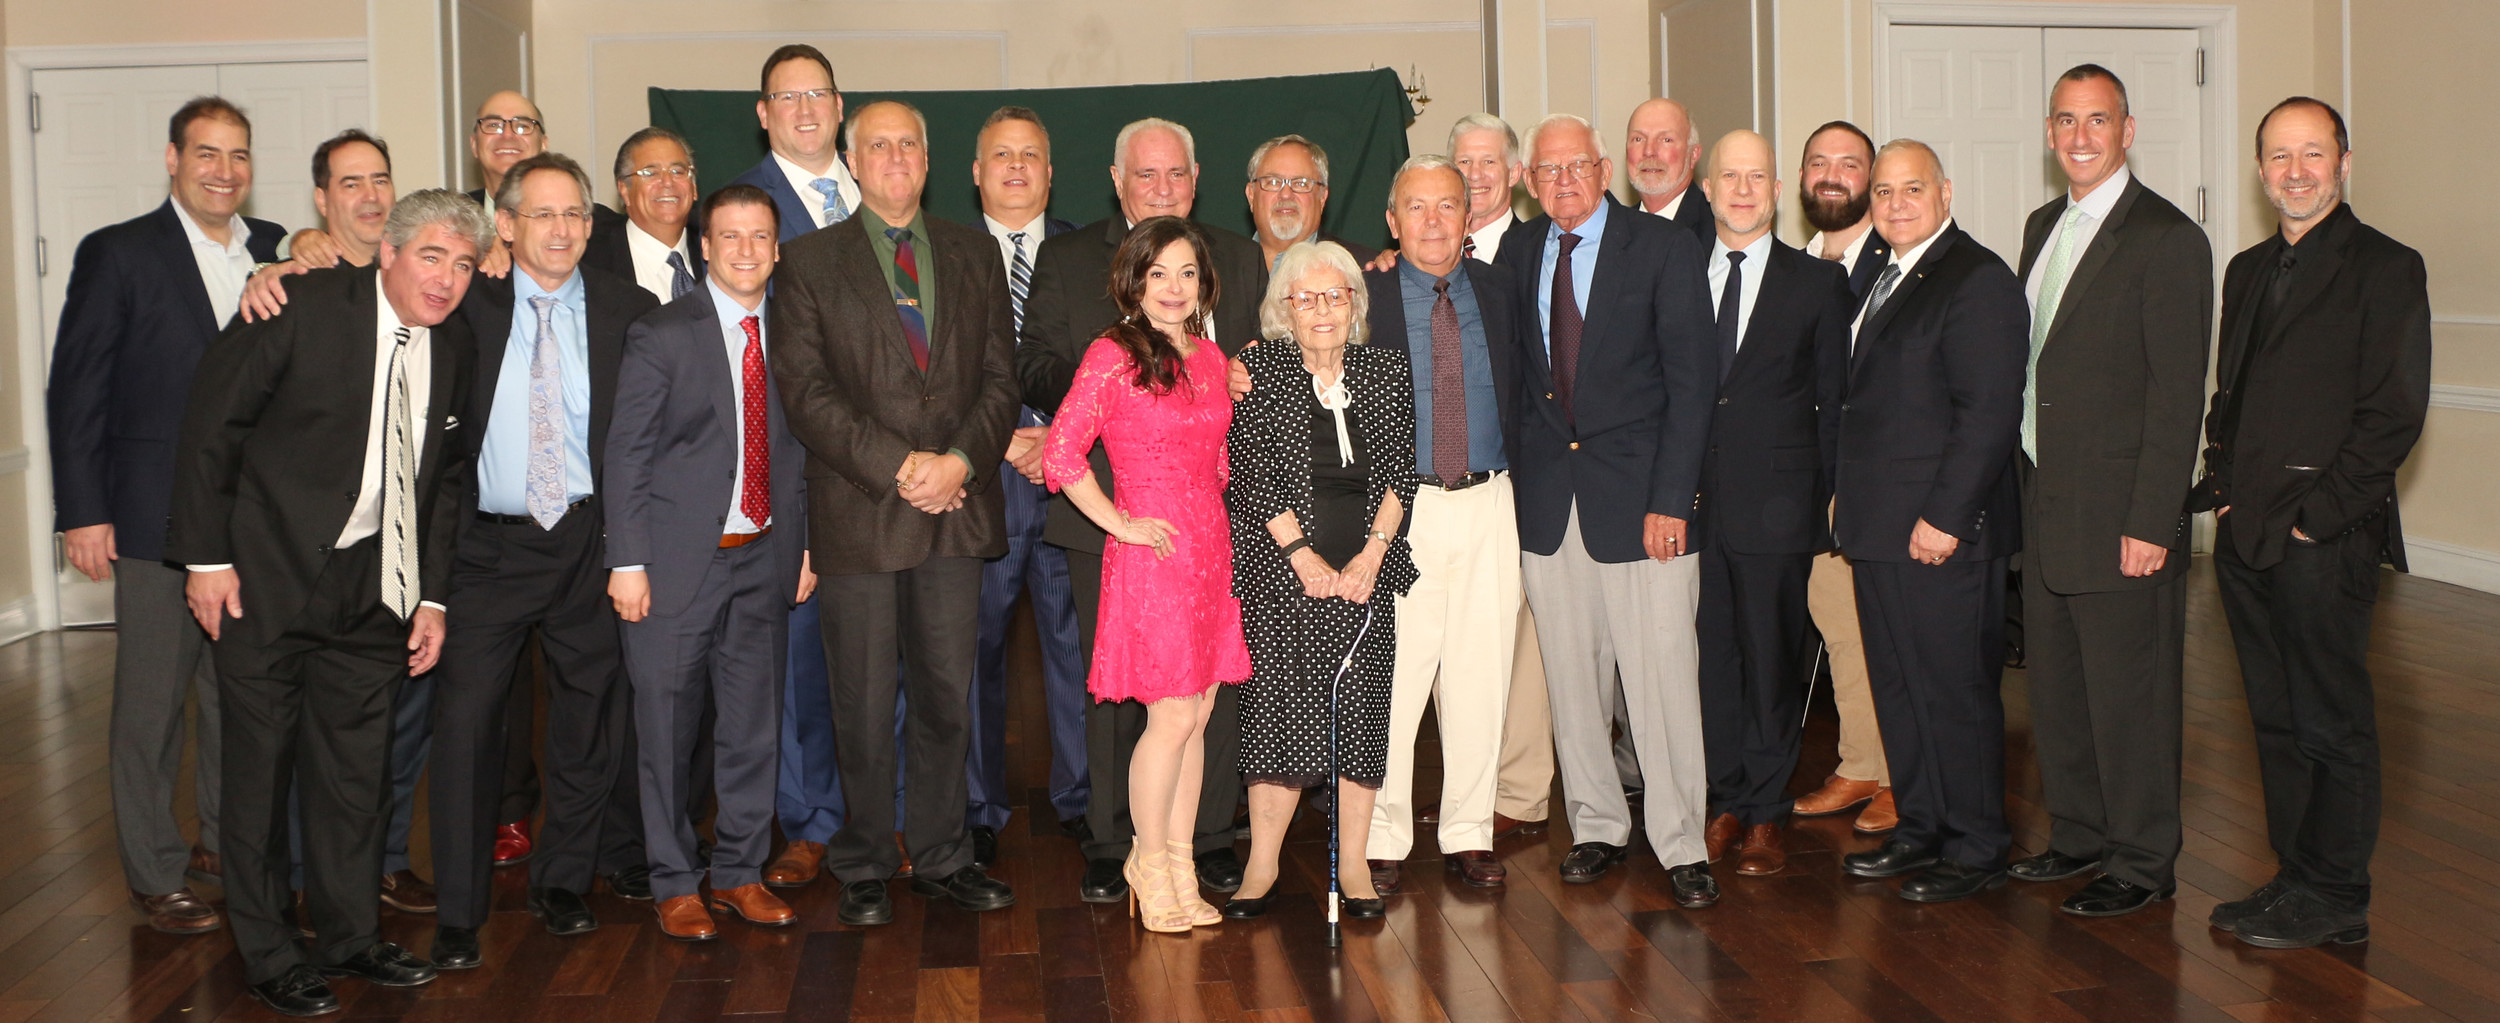 Coinciding with Bellmore's JFK High School's 50th anniversary, 13 former students were inducted into the school's Hall of Fame, and two teachers into its Wall of Honor. Alumni included Lyle Phillips, Richard Jackson, Steven Lutvak, Mark Proctor, Joseph Alagna, Howard Riina, Craig Greben, Michael Greenberg, Wayne Levinson, Thomas Buda, Merrick Wetzler, David Silverberg and Jonathan Haas. The faculty members were Shula Hirsch and Gregory Maushart.